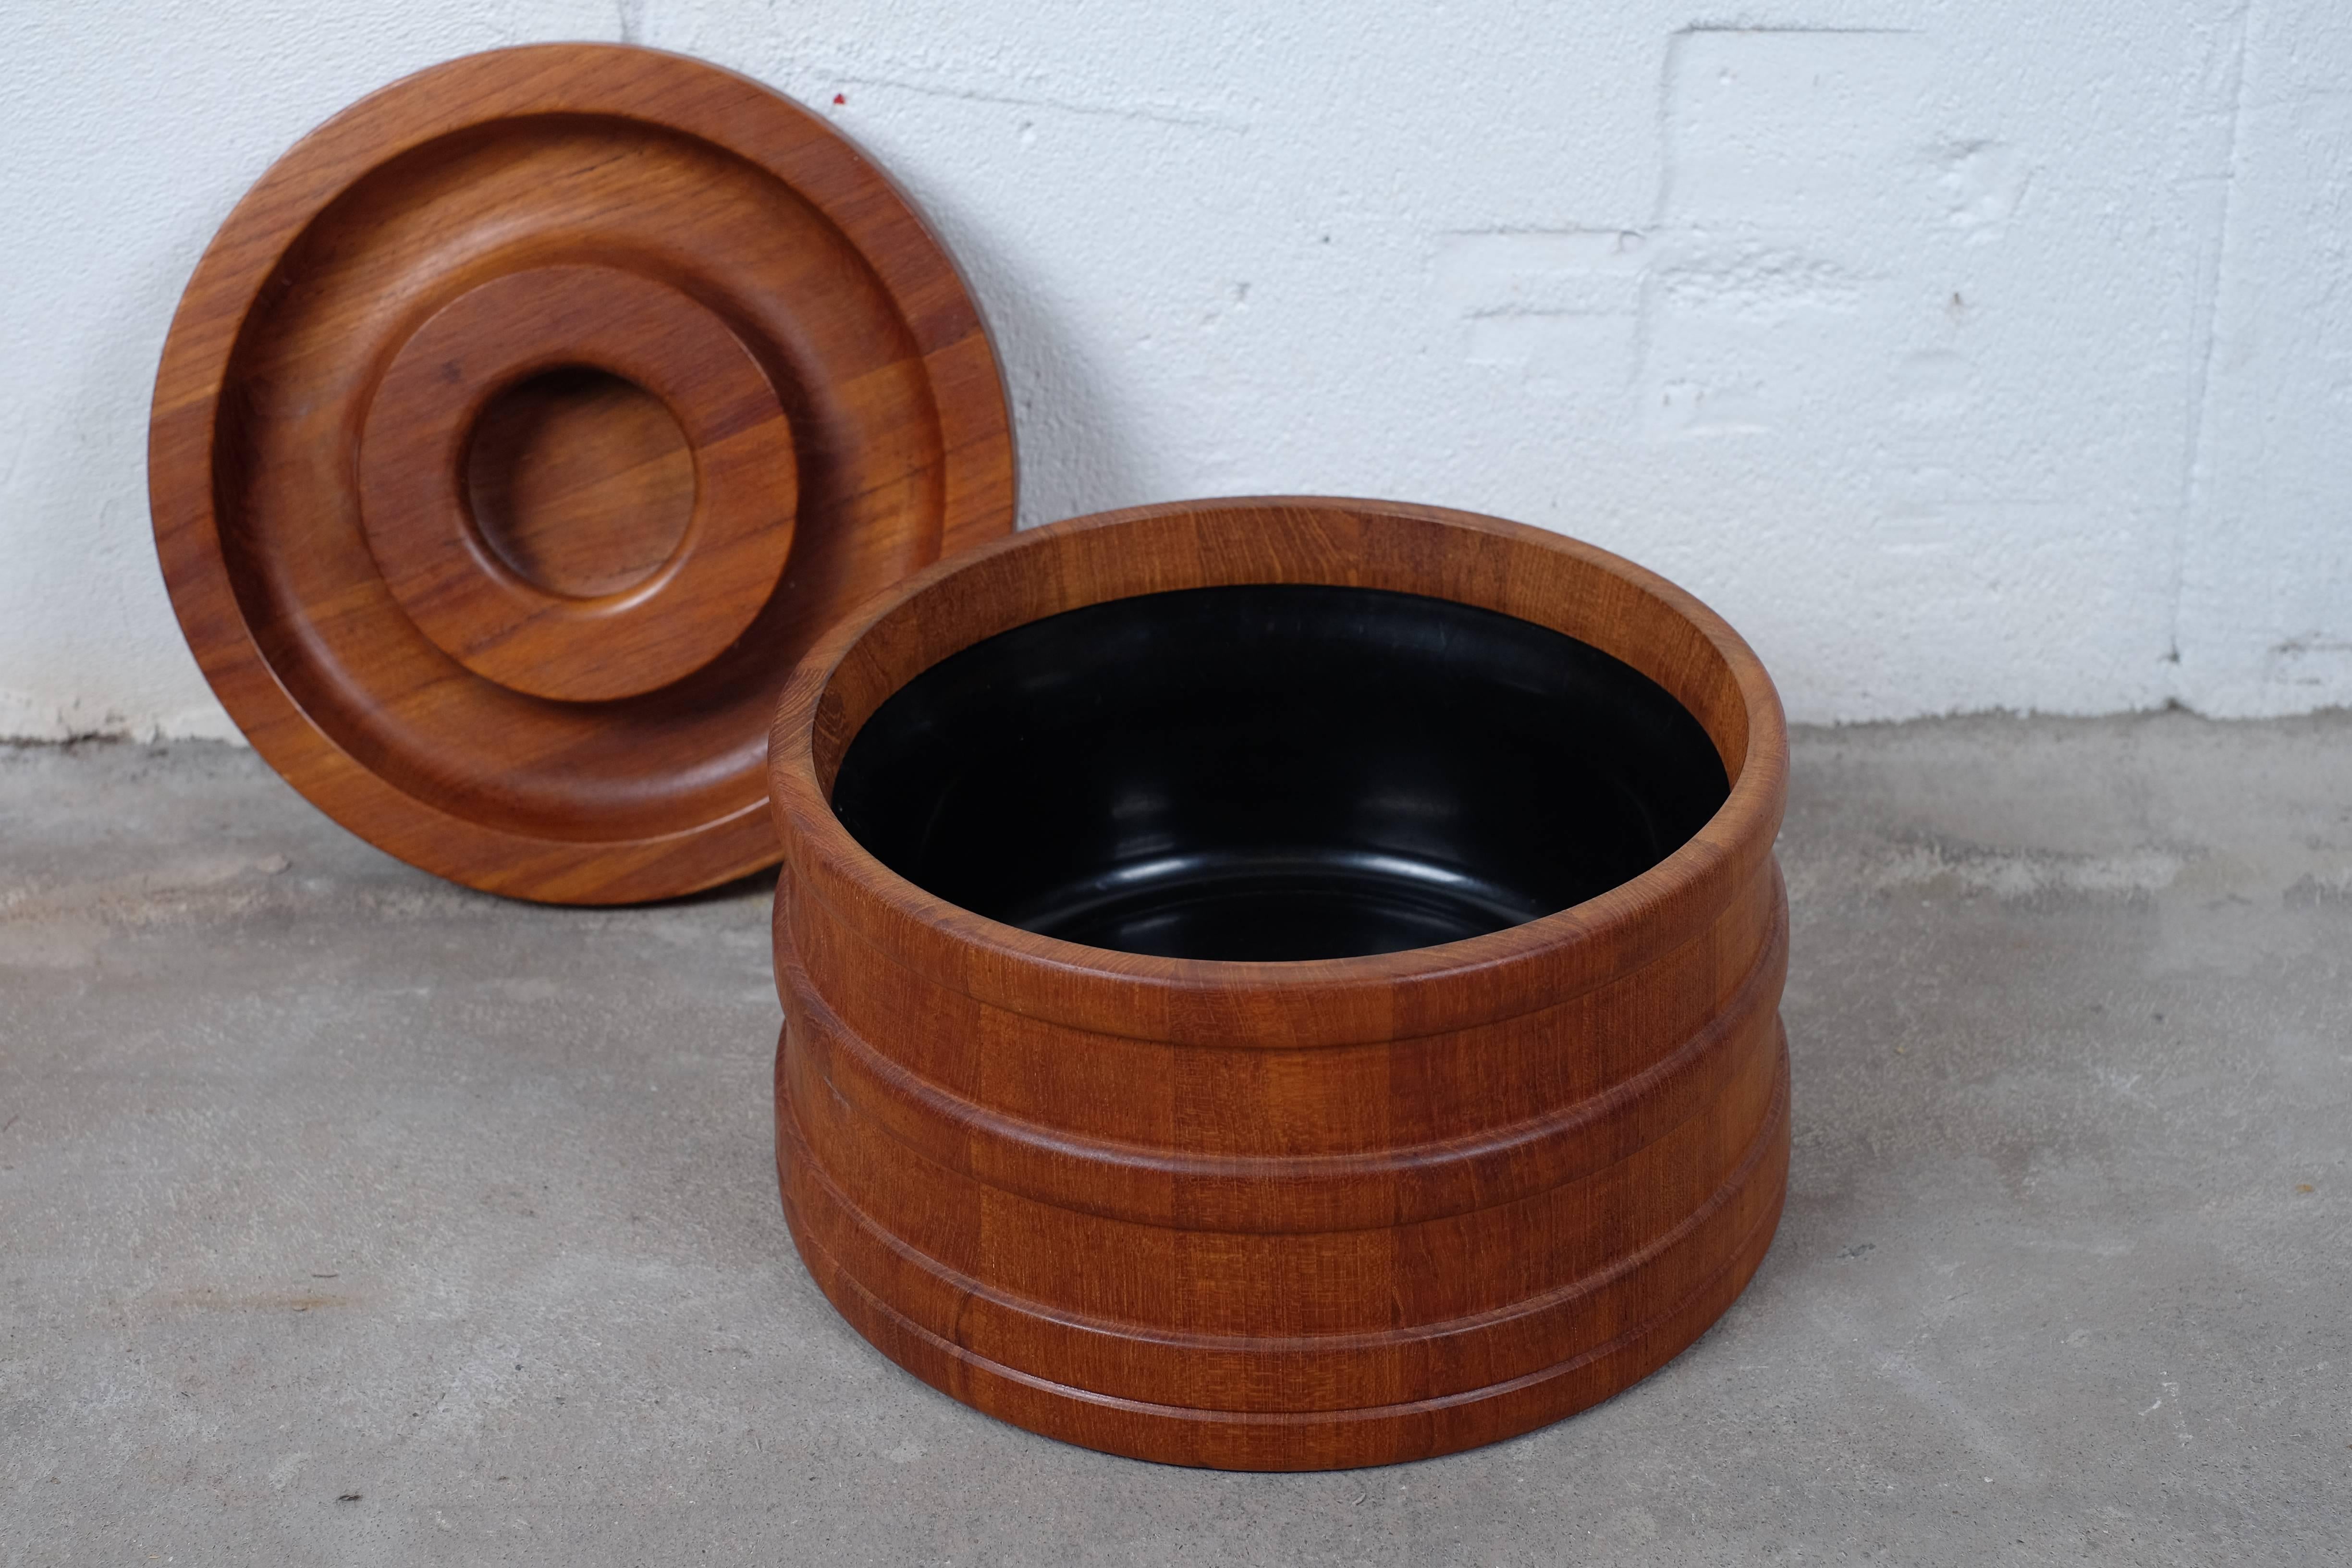 Danish design ice bucket in teak by Jens Harald Quistgaard. 

The container is a slightly tapered cylinder banded with rings in teak. 
Retains its original black plastic liner inside.

Branded mark on underside, Dansk design.

Condition is